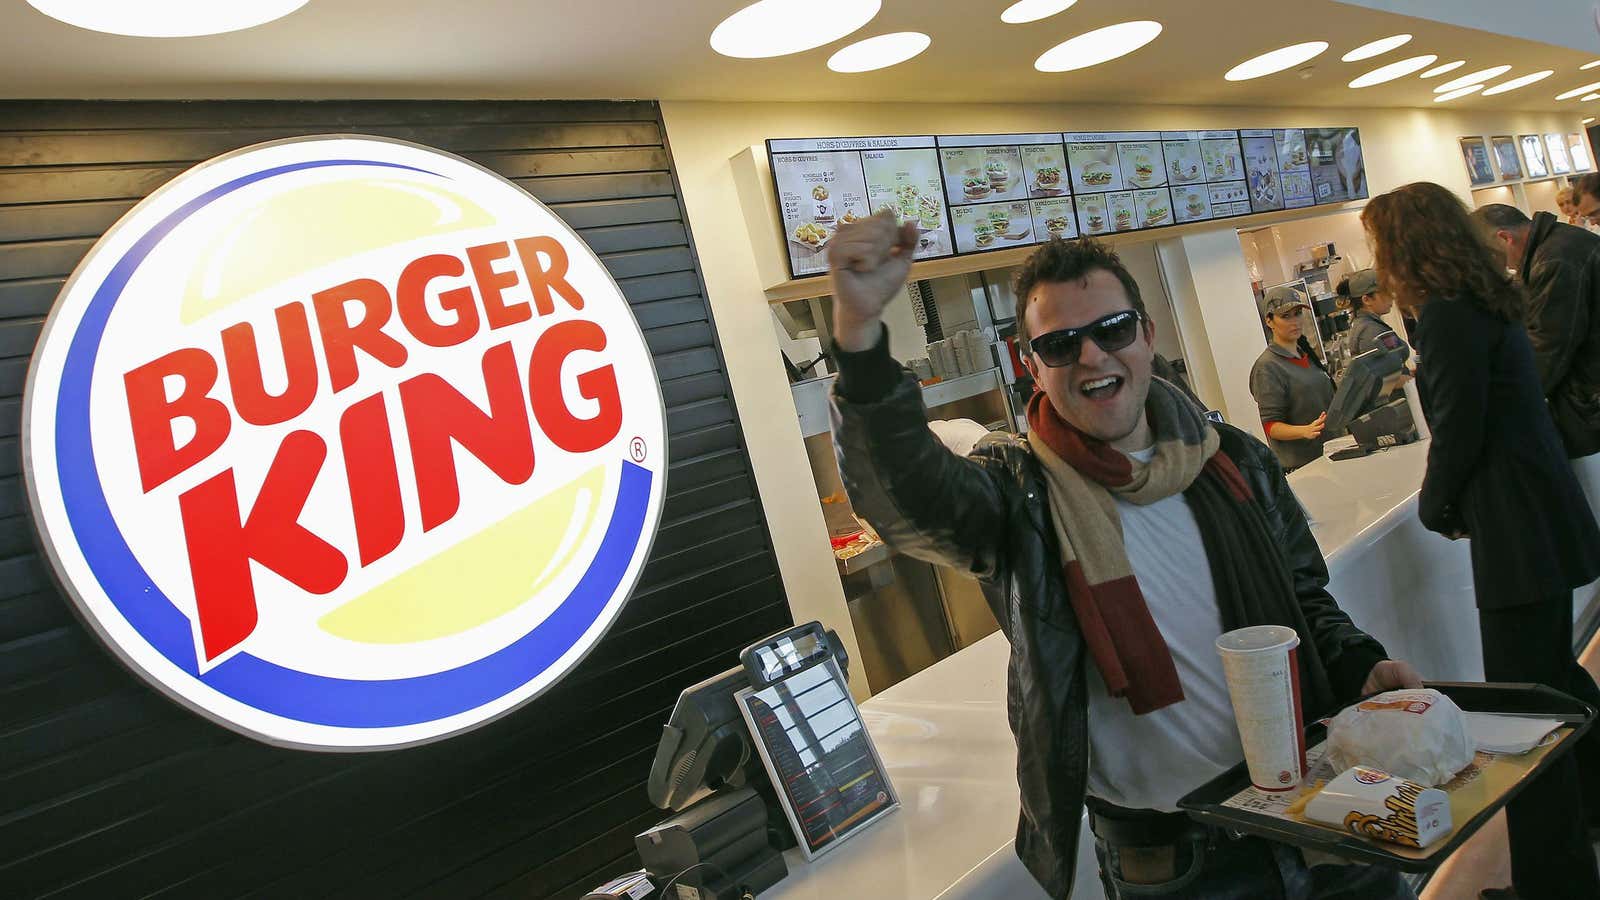 Americans might not be happy about Burger King moving to Canada